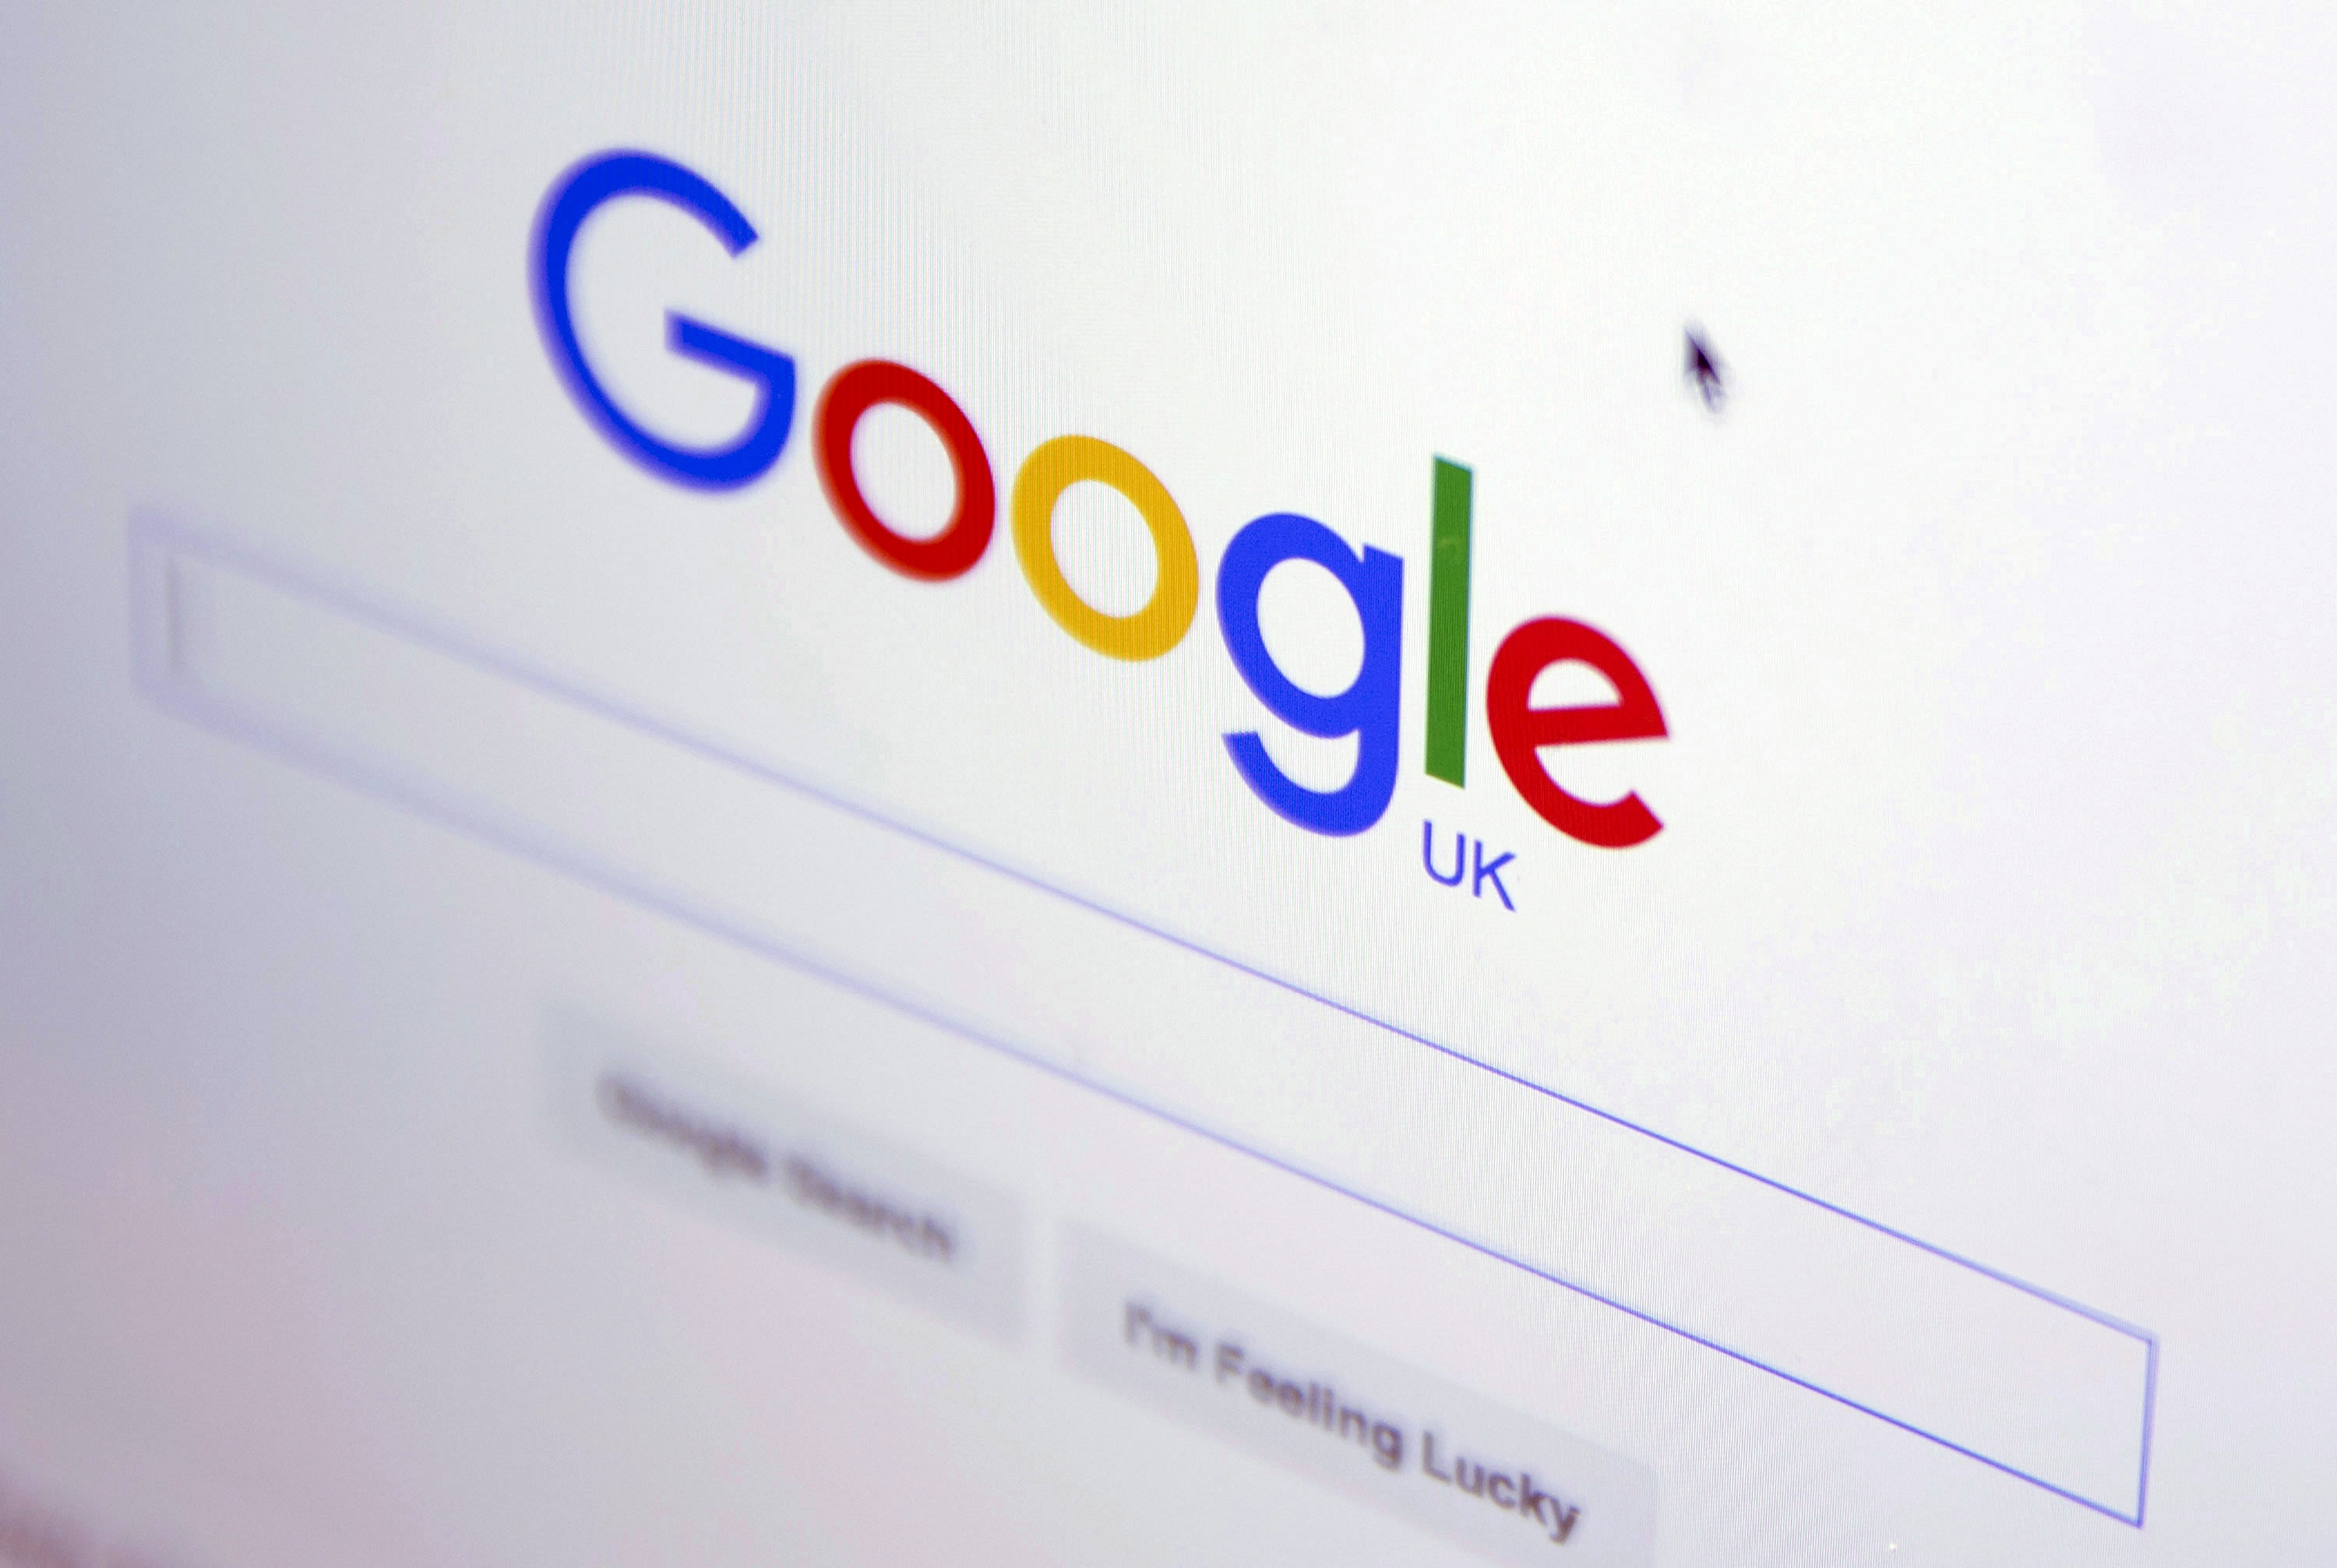 If British Google users have their data kept in Ireland, it would be more difficult for British authorities to recover it in criminal investigations. (Credit: Reuters Photo)